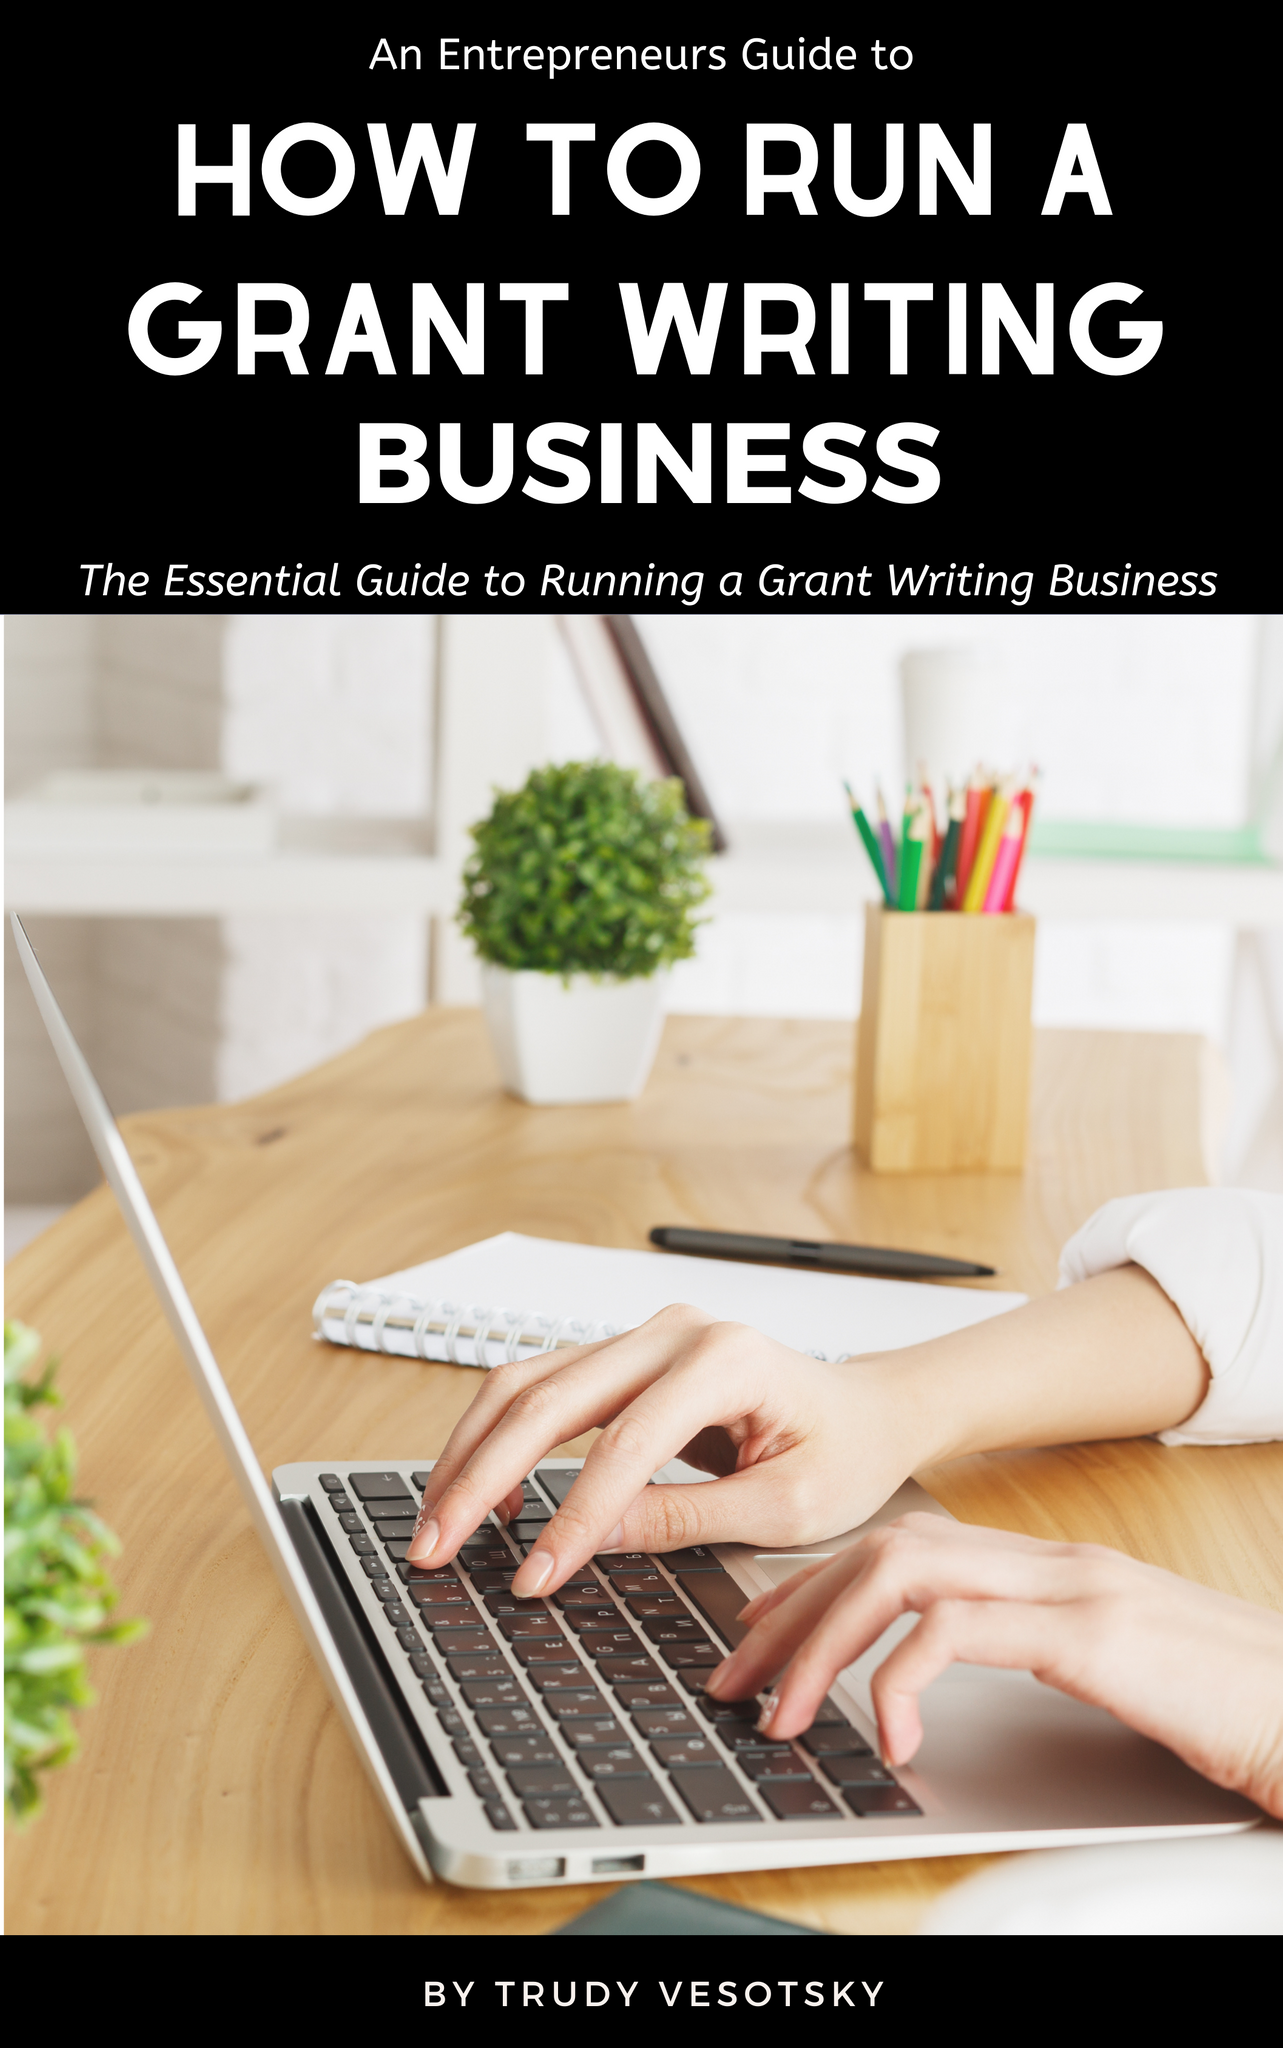 How to Run a Grant Writing Business from Home - 1:1 Training